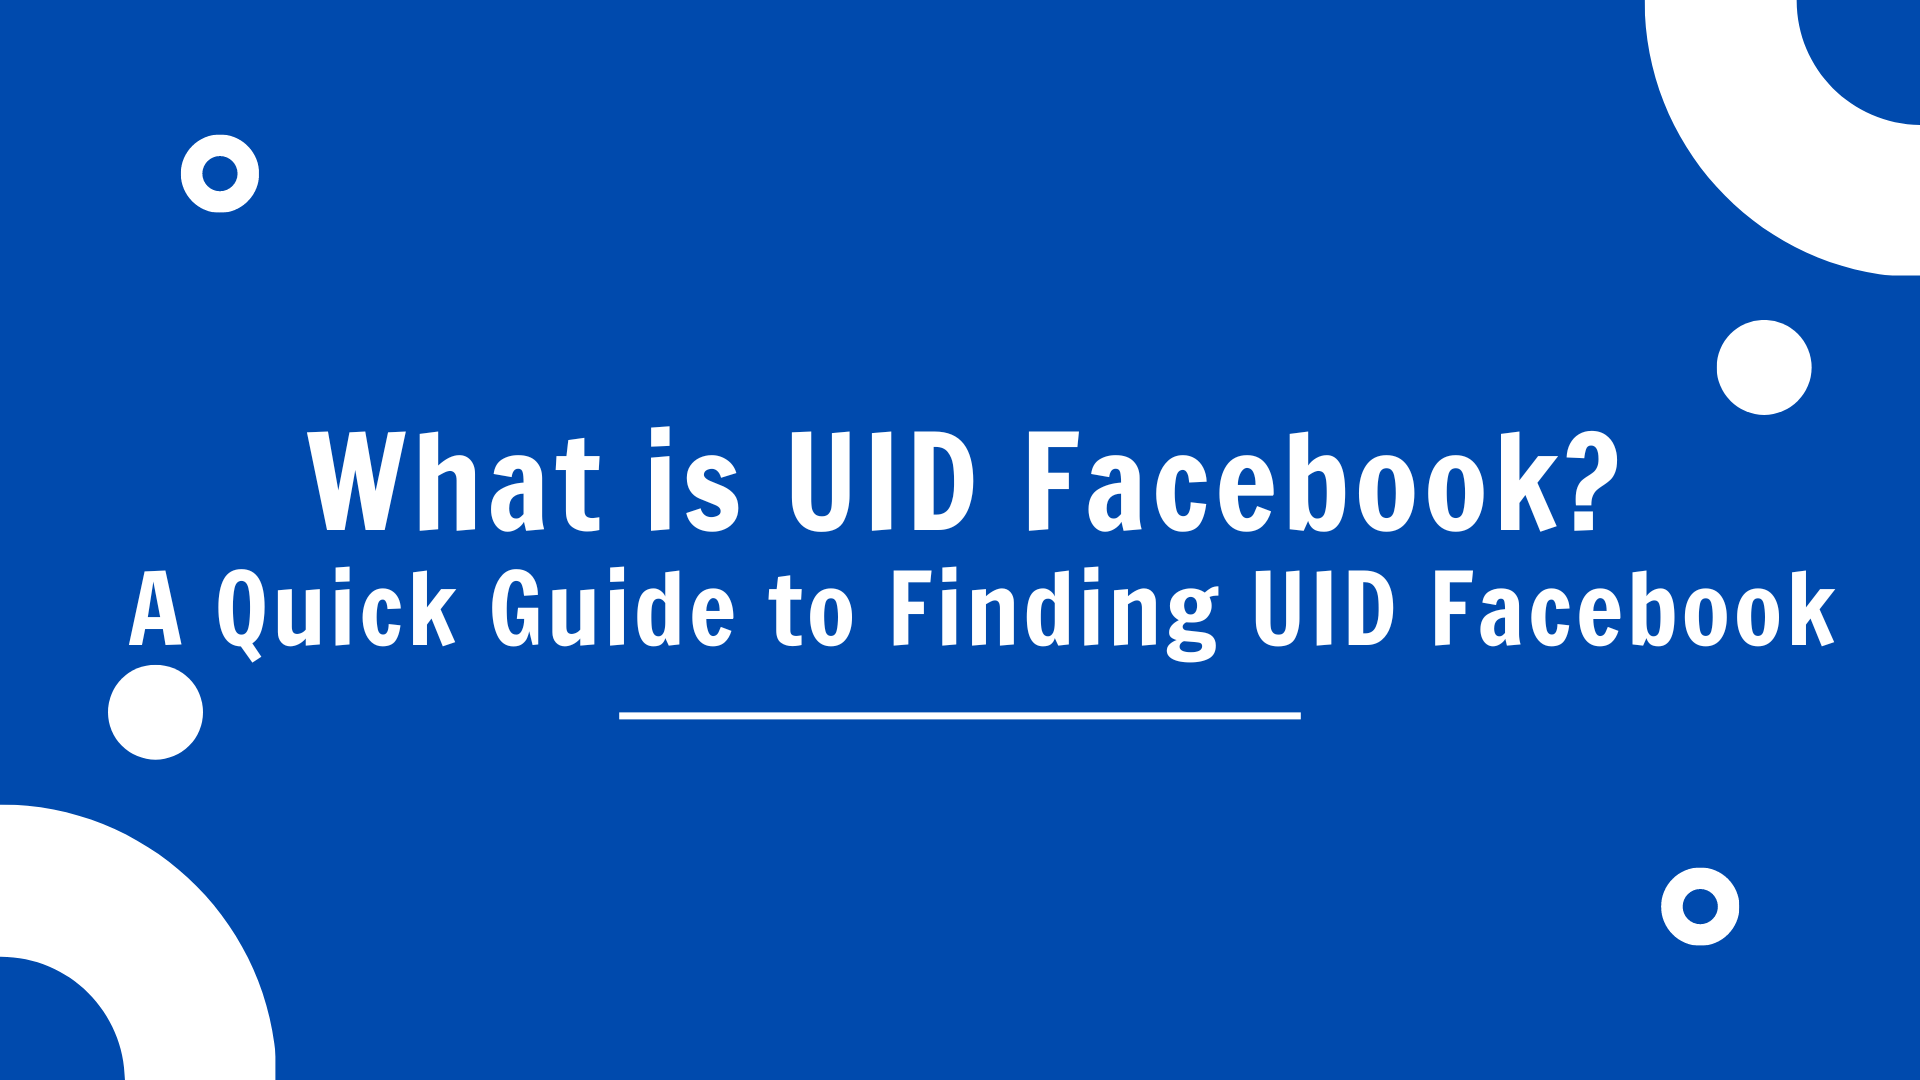 What Is UID Facebook? A Quick Guide to Finding UID Facebook